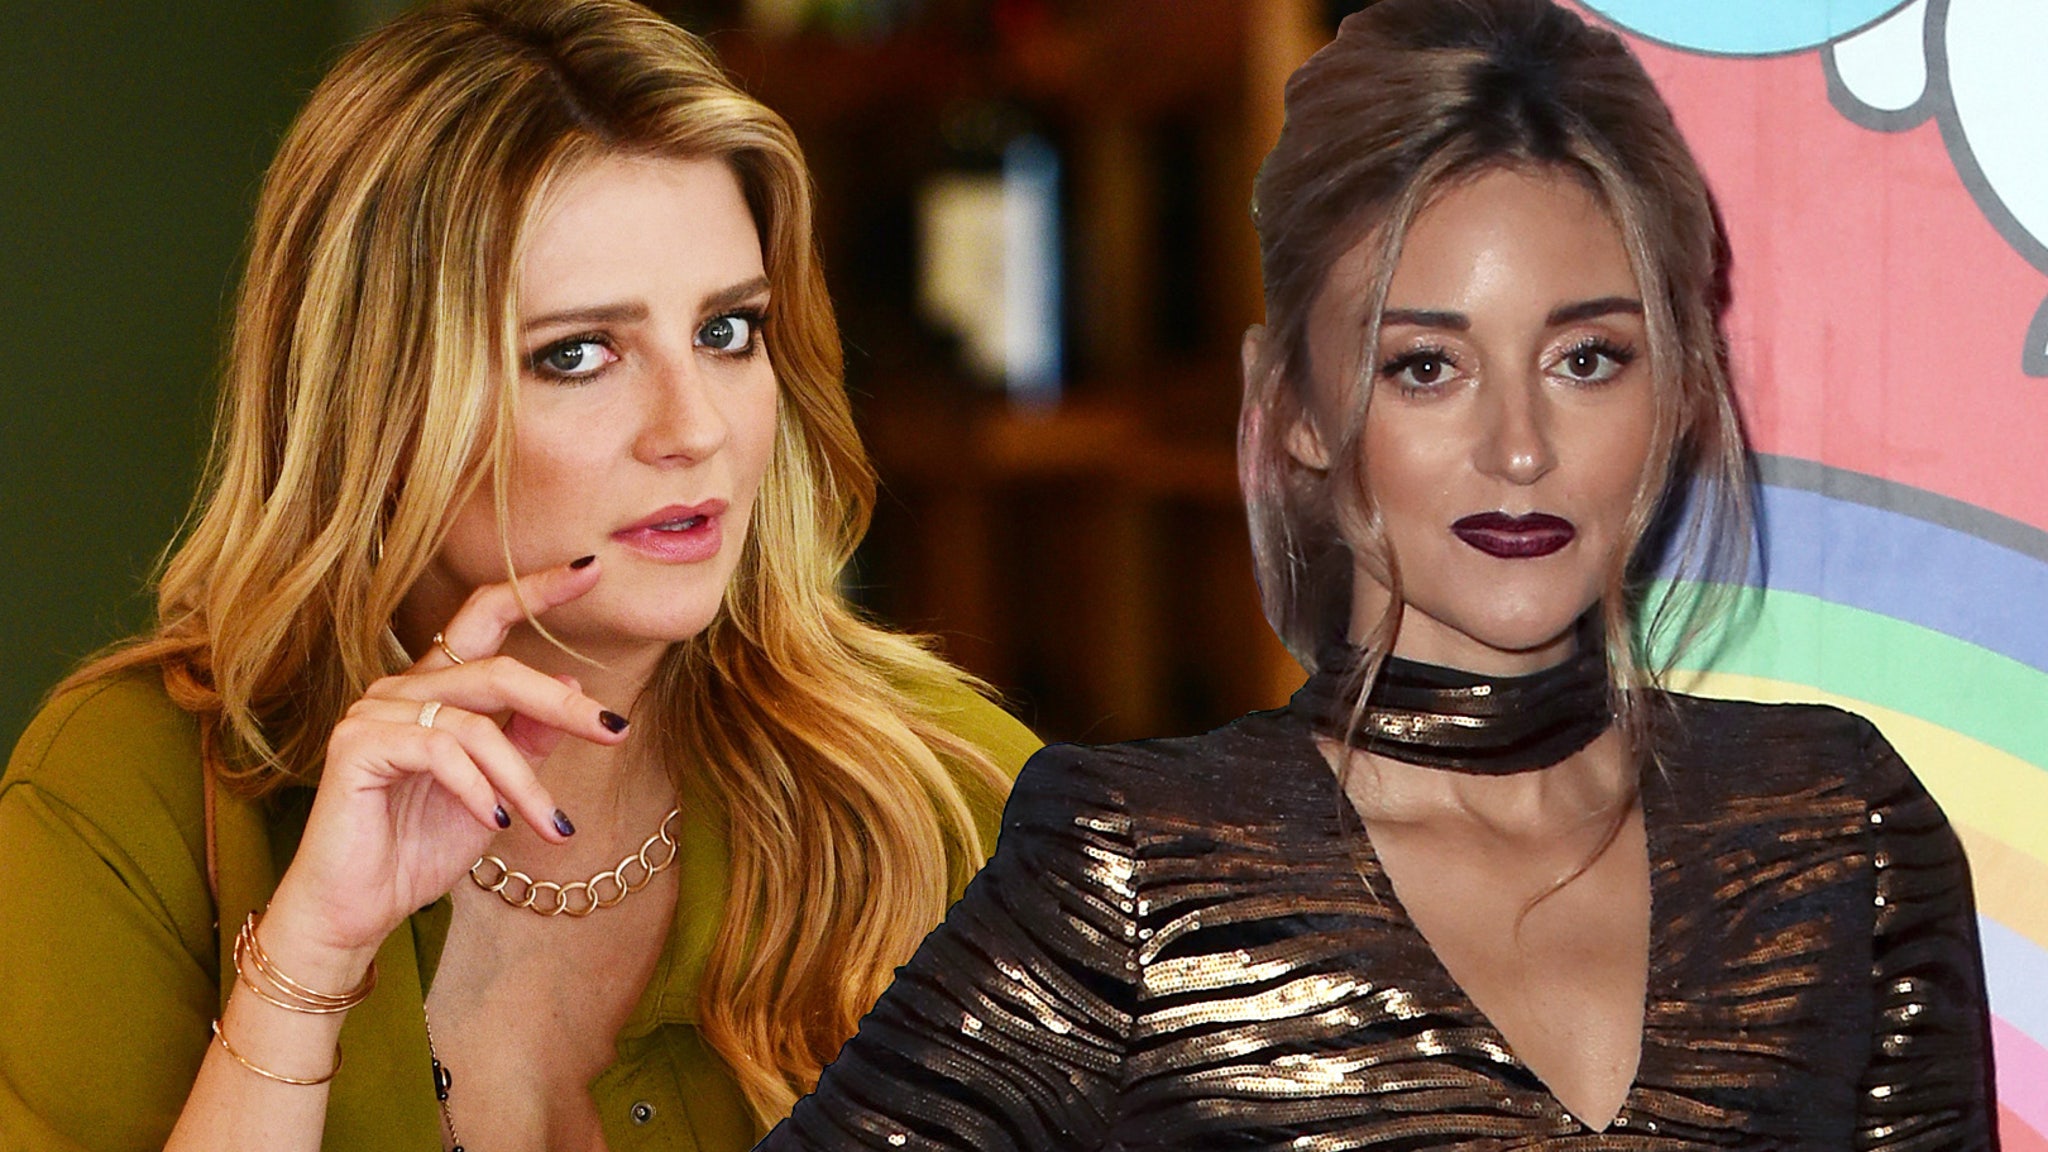 Mischa Barton Slams Caroline Damore After Shes Reportedly Replaced On 